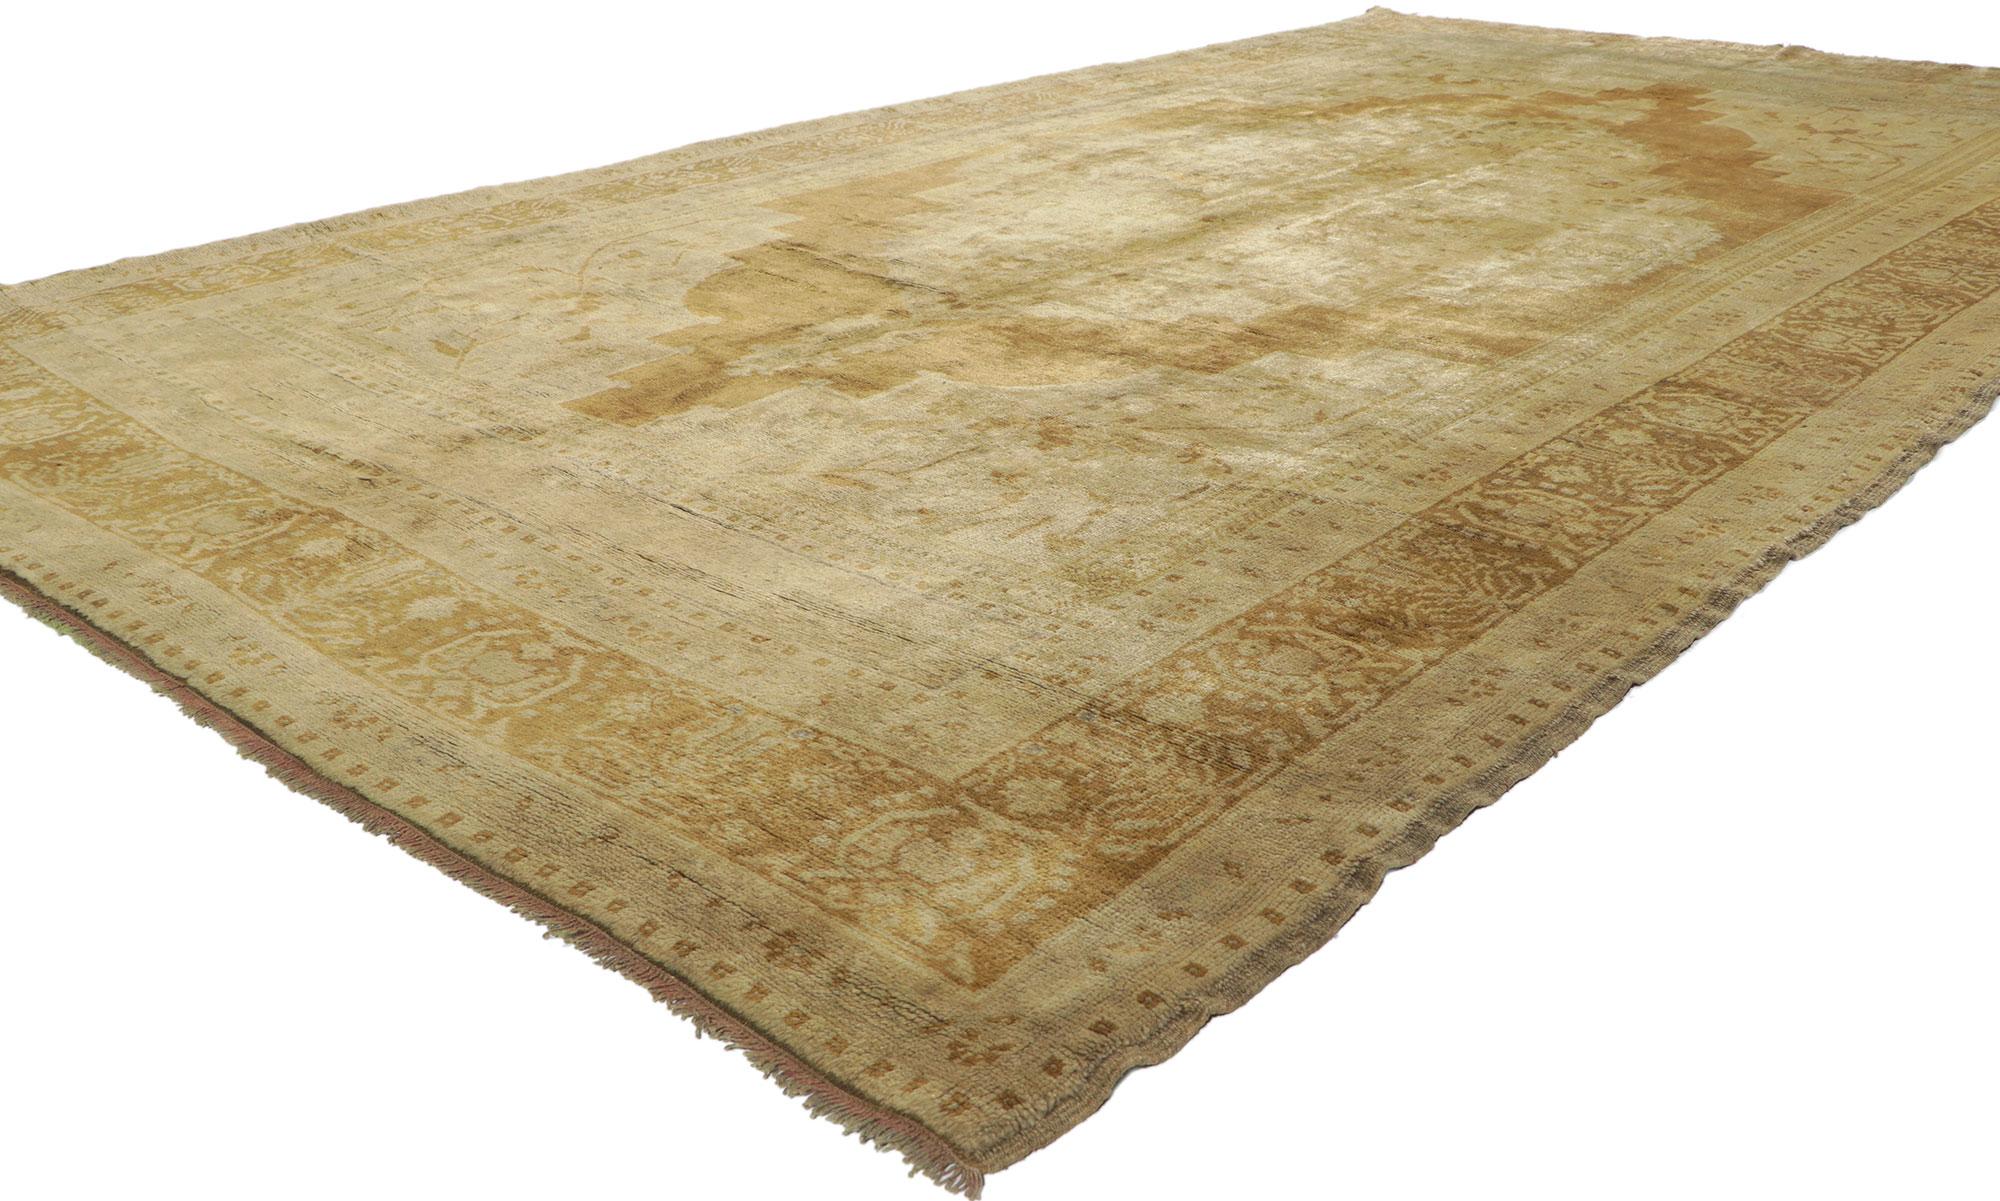 50520 vintage Turkish Oushak rug with warm, Feminine Rustic style, Hallway Runner. Warm, feminine rustic style meets unpretentious and simple. This hand knotted wool vintage Turkish Oushak rug features a large scale cusped medallion filled with